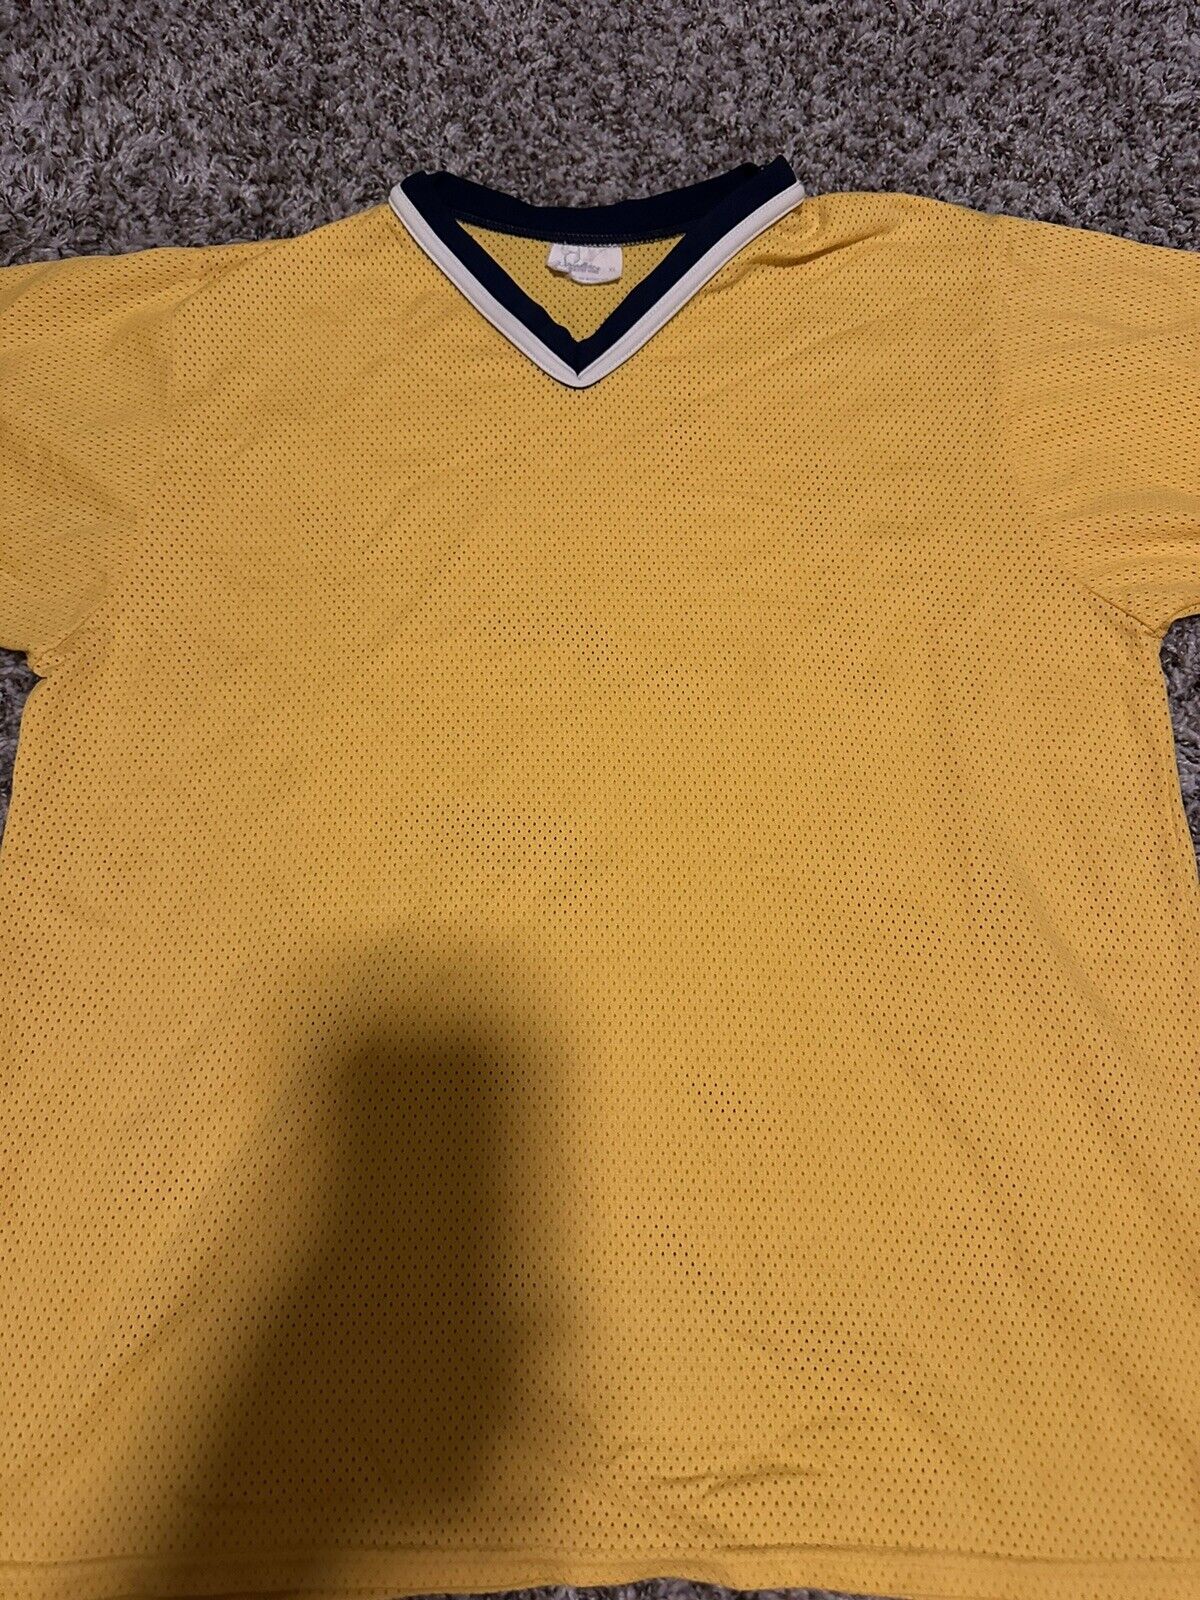 Vintage 60’s 70’s Yellow blank jersey size X-Large